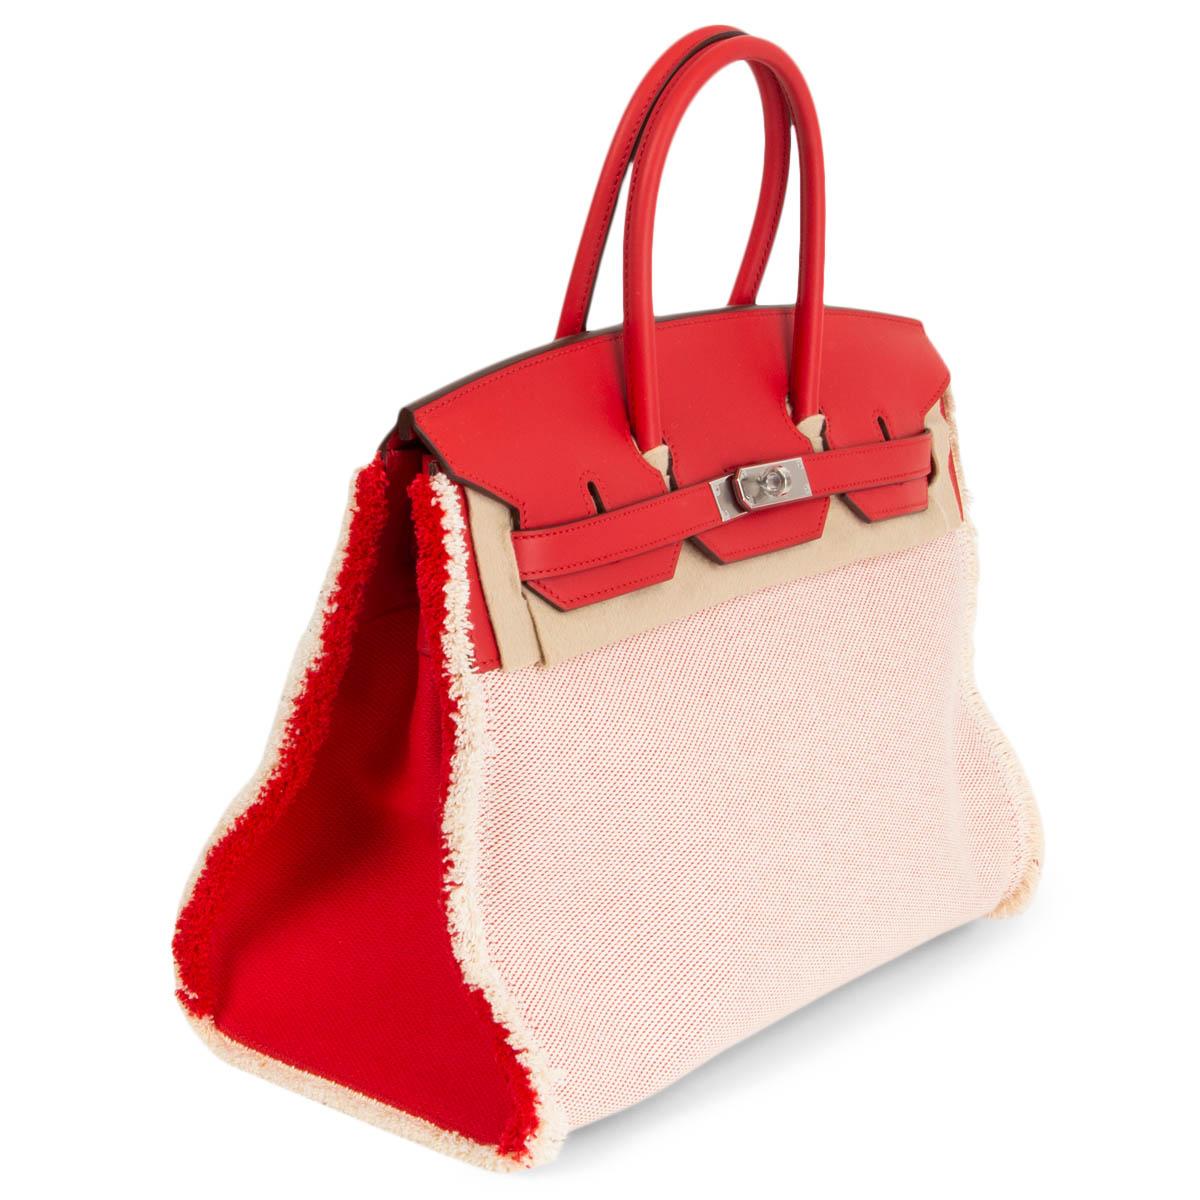 100% authentic Hermès 'Burkin 35 Fray Fray' tote in Ecru (off-white) Toile H. canvas and Rouge de Coeur (red) Swift leather. with mini fringe edges. Limited edition for spring/summer 2021. Lined in Rouge de Coeur leather with a zipper pocket against